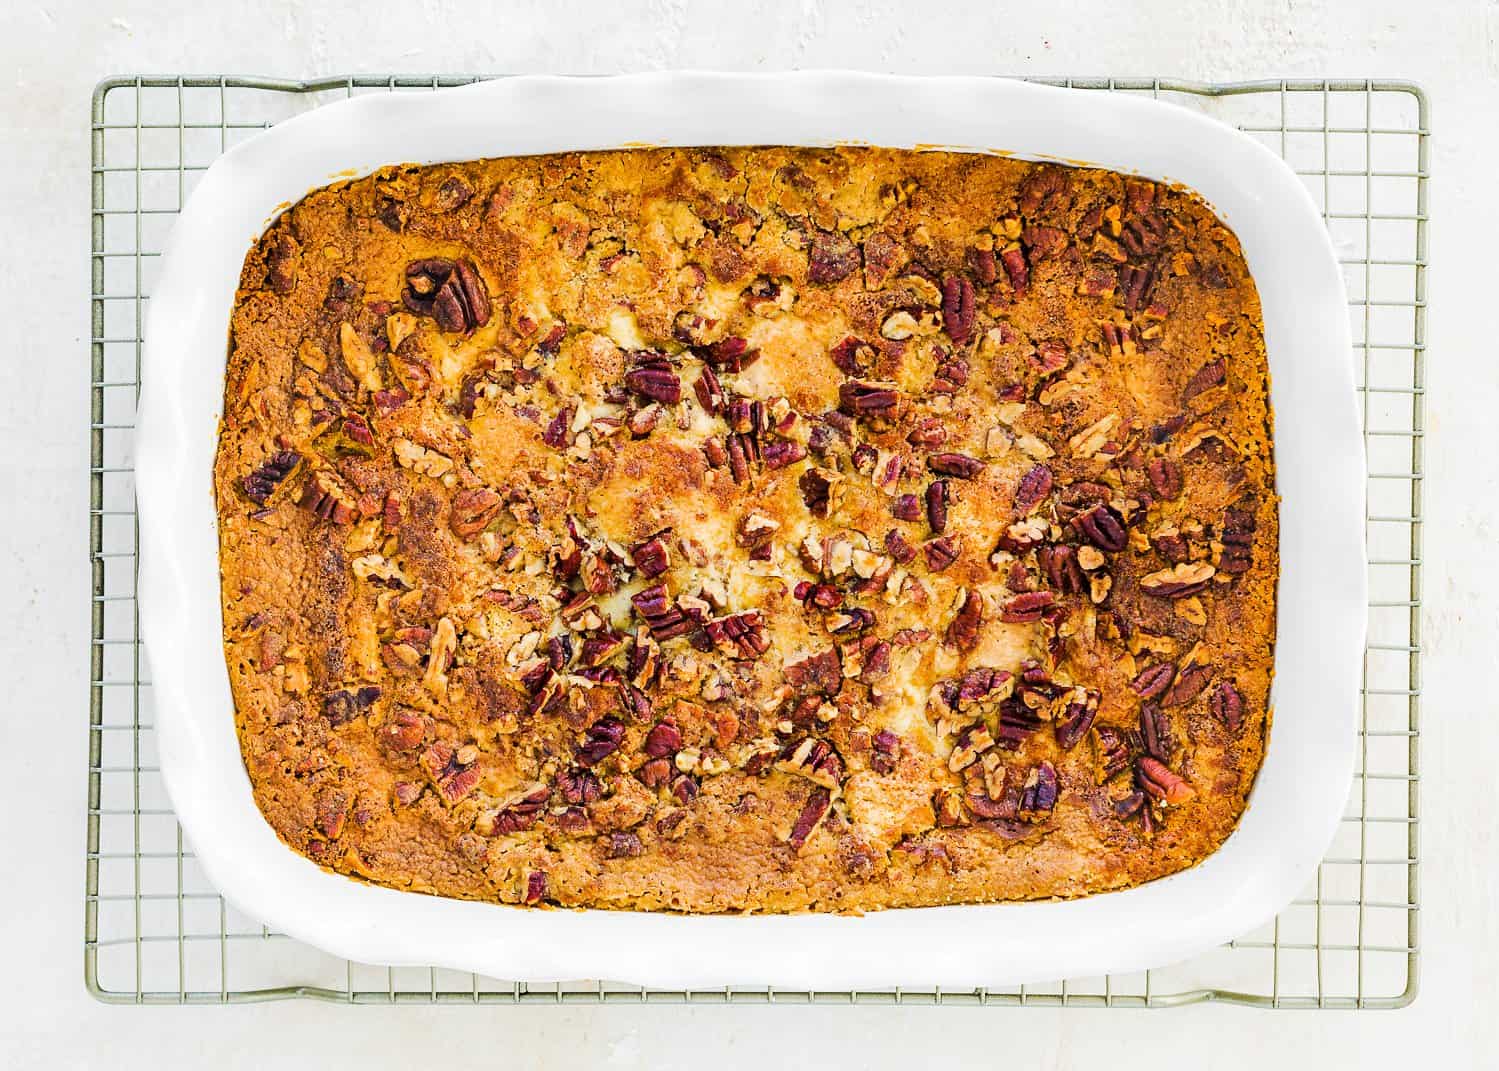 bake eggless dump cake in a baking dish over a cooling rack. 